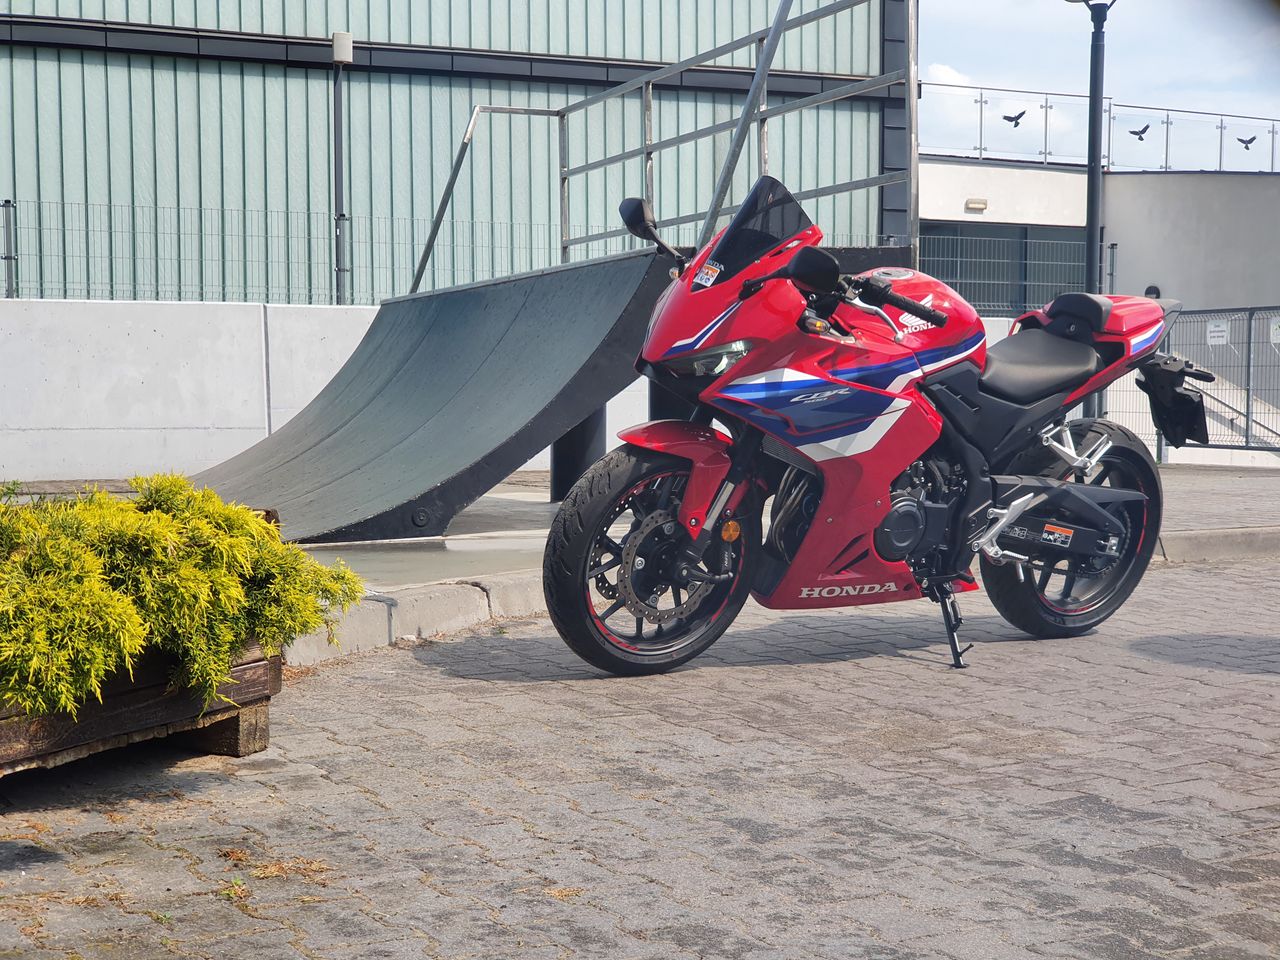 New Honda CBR500R: Affordable entry point with a racing soul